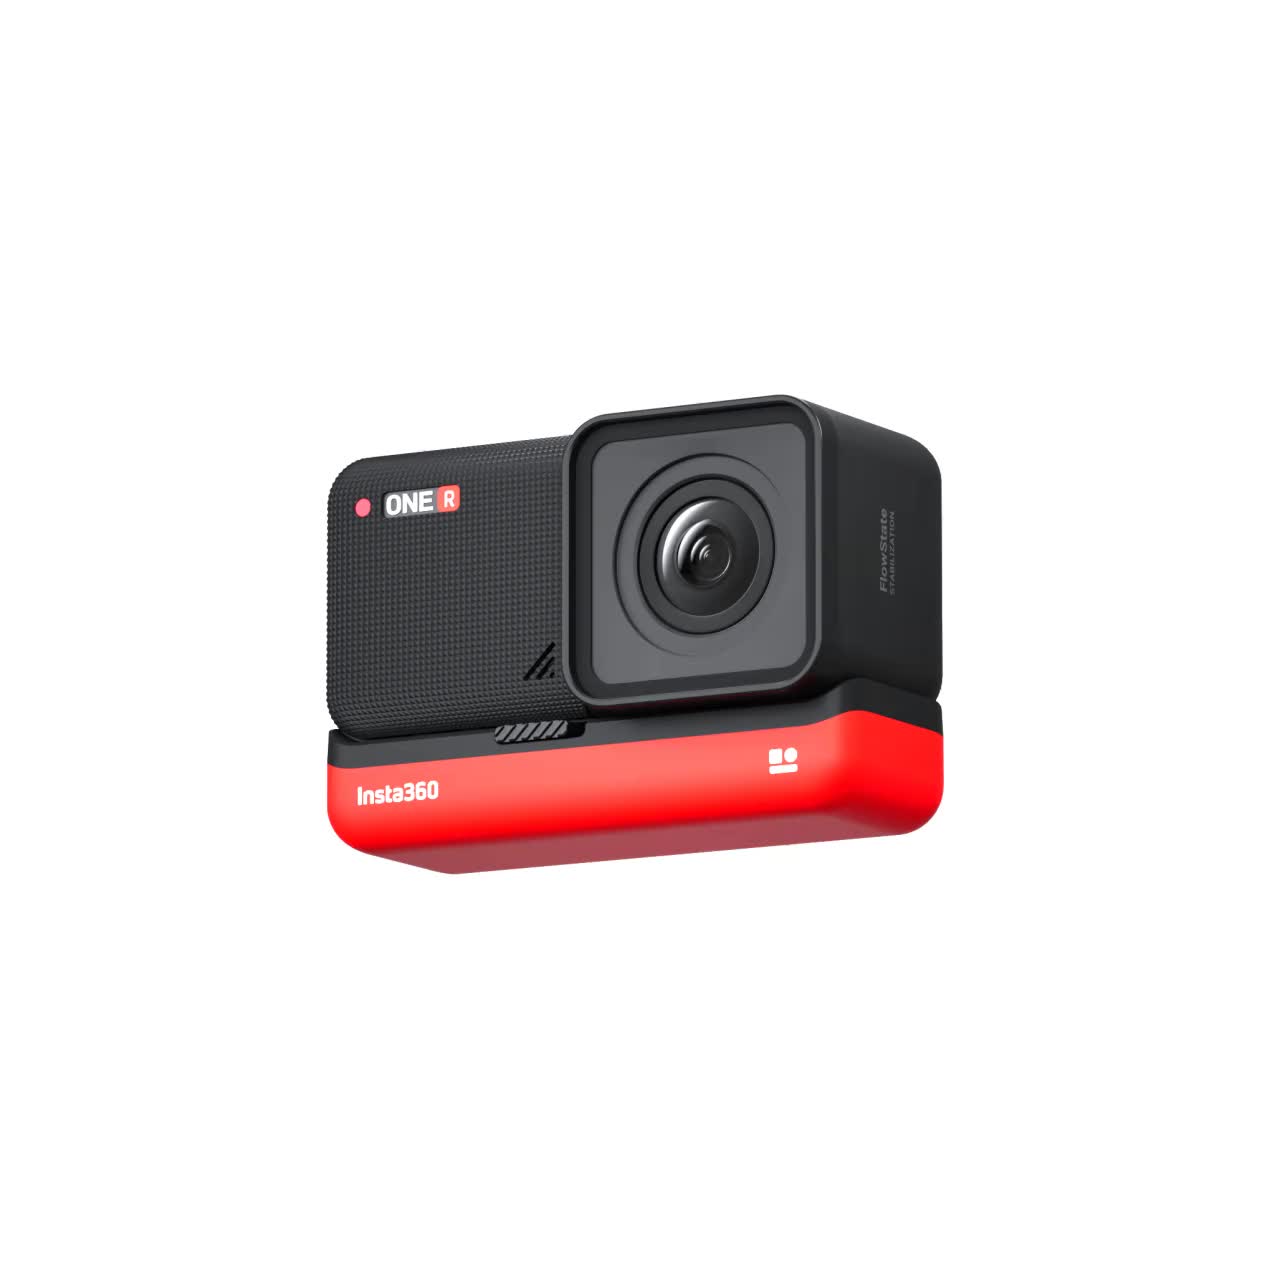 Rs insta360 one Insta360 ONE